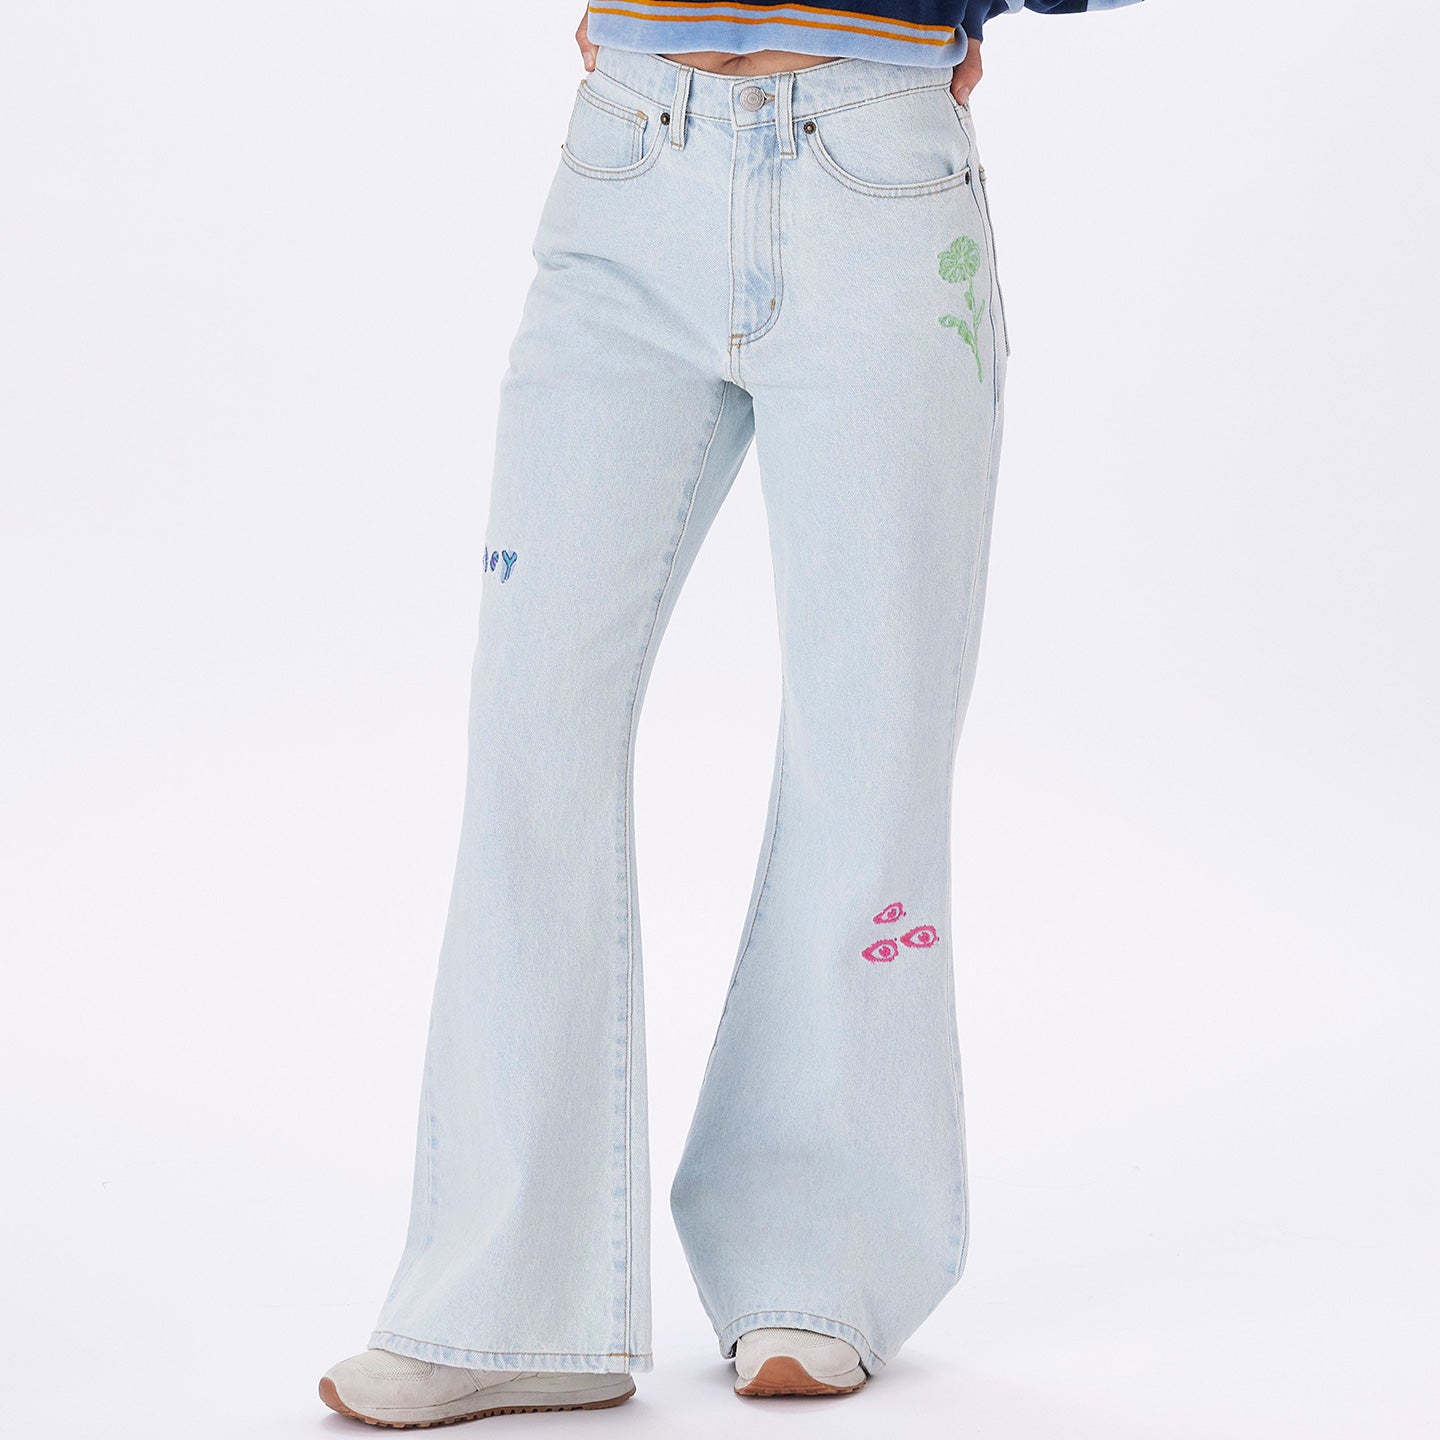 Obey Womens Rory Flare Denim Pant - Icy Wash